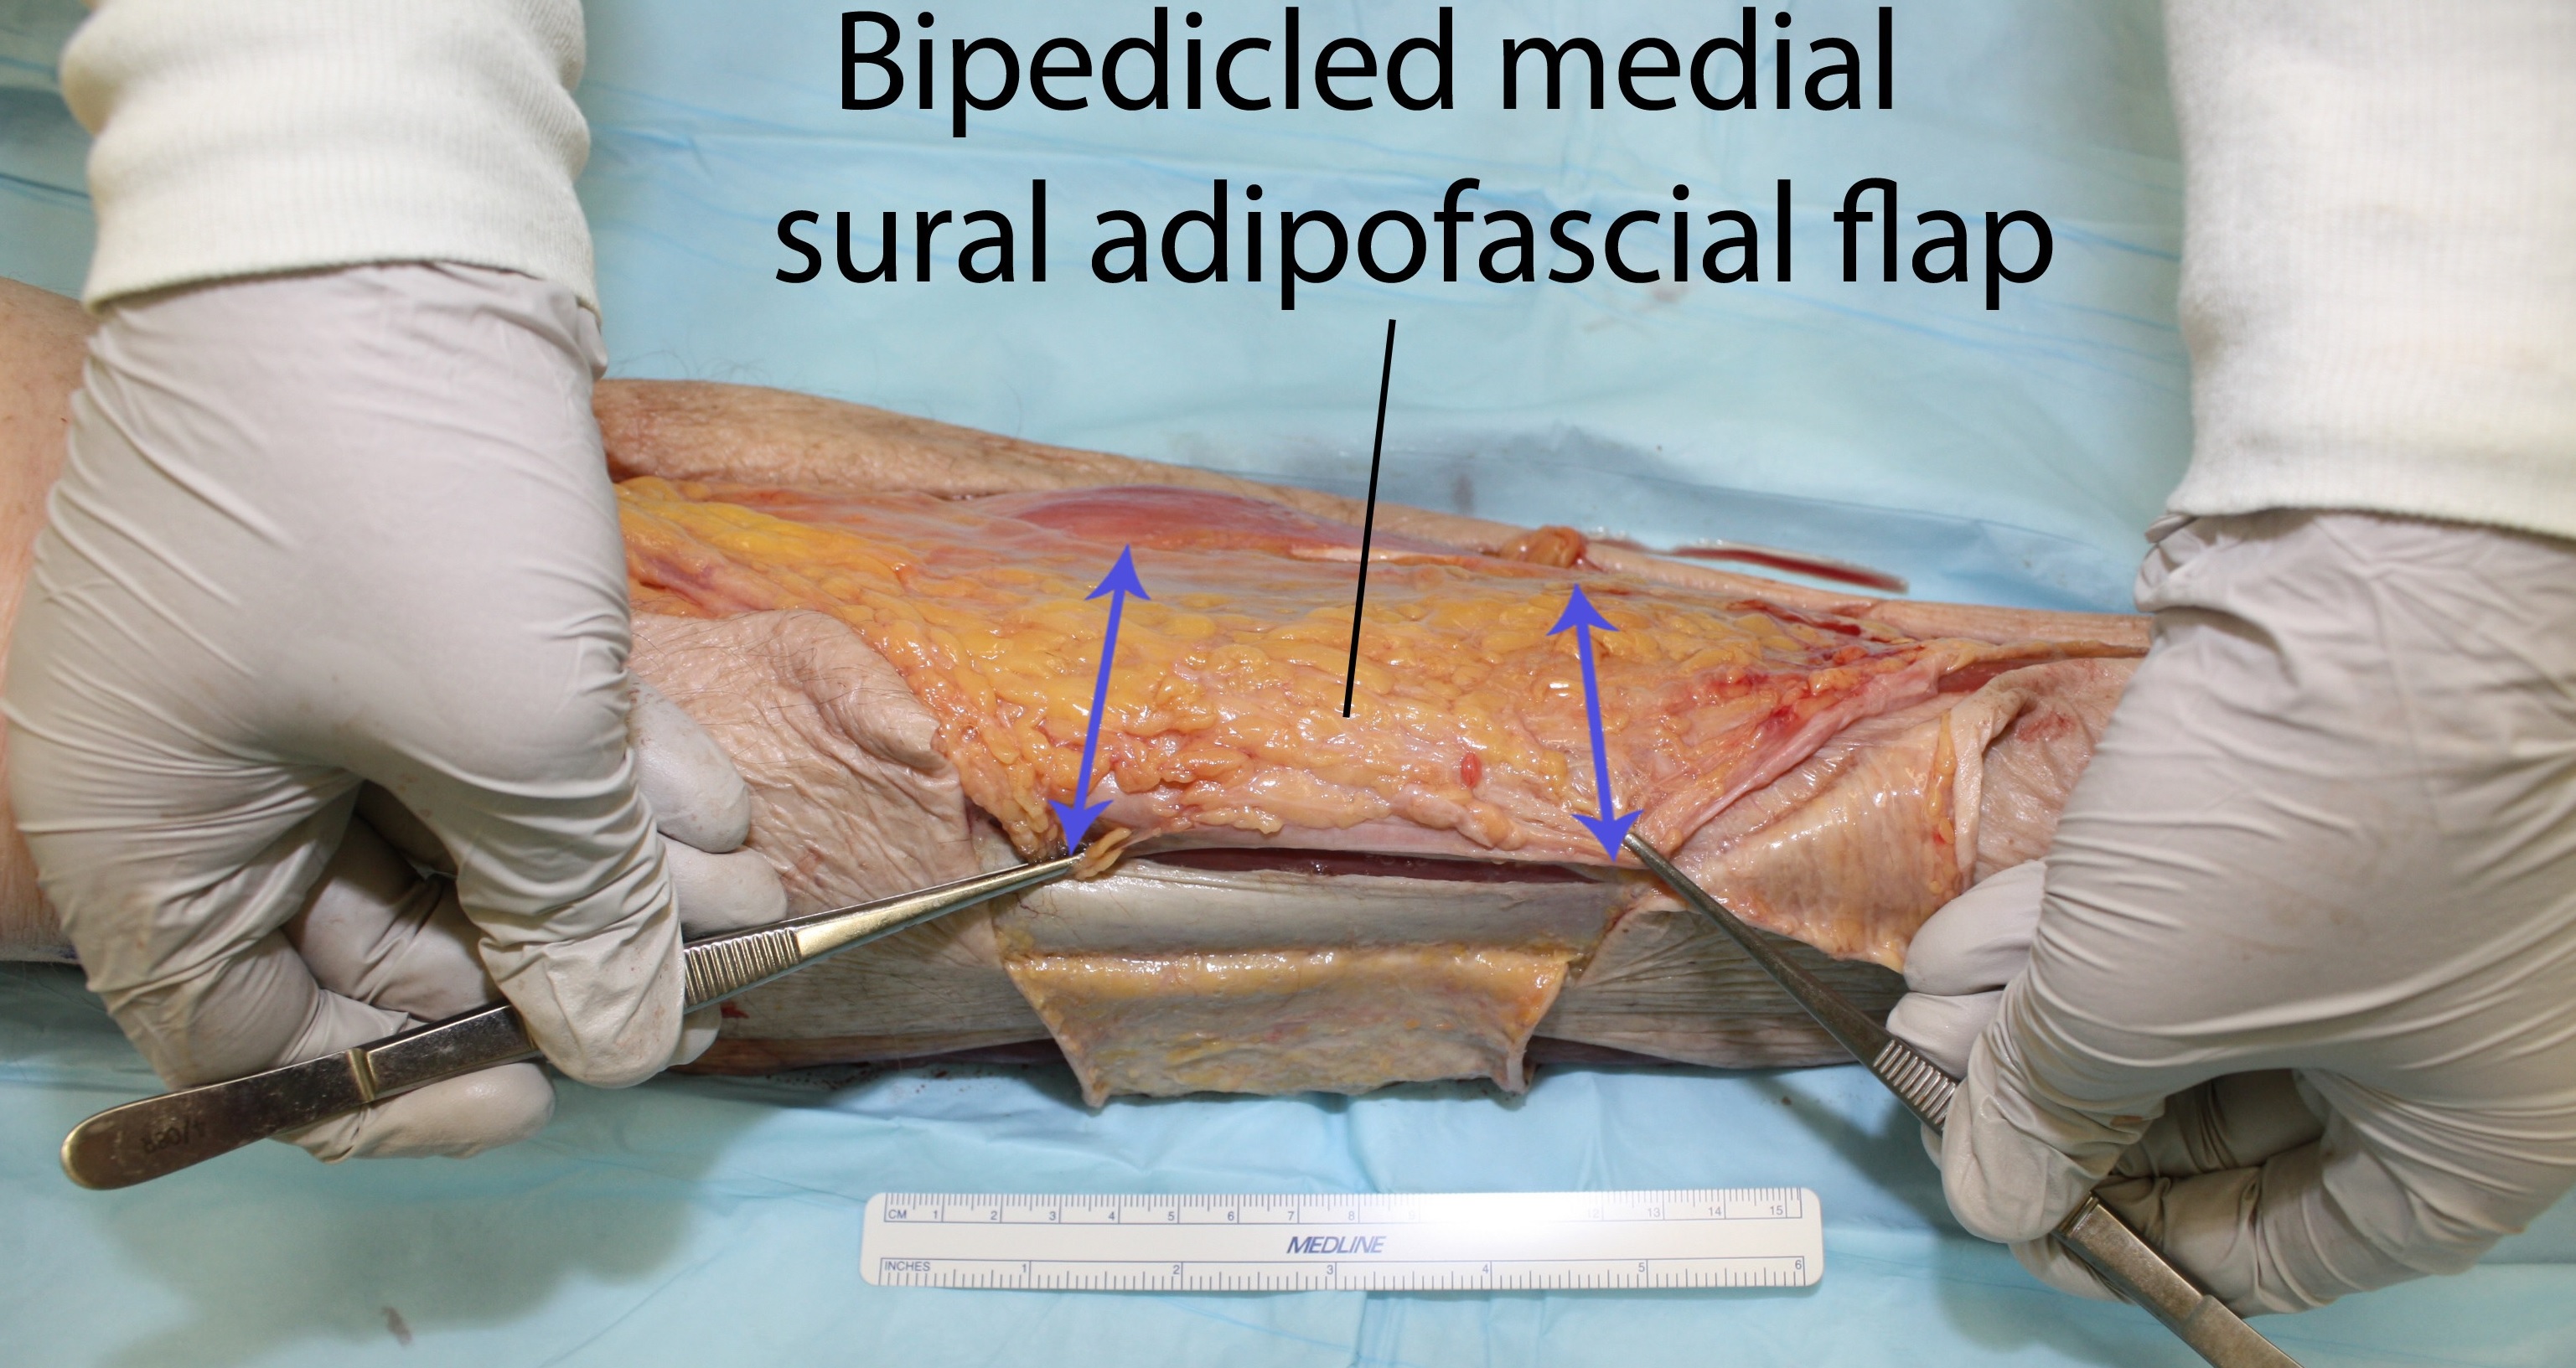 NESPS - Bipedicled Medial Sural Adipofascial Flap for Coverage of